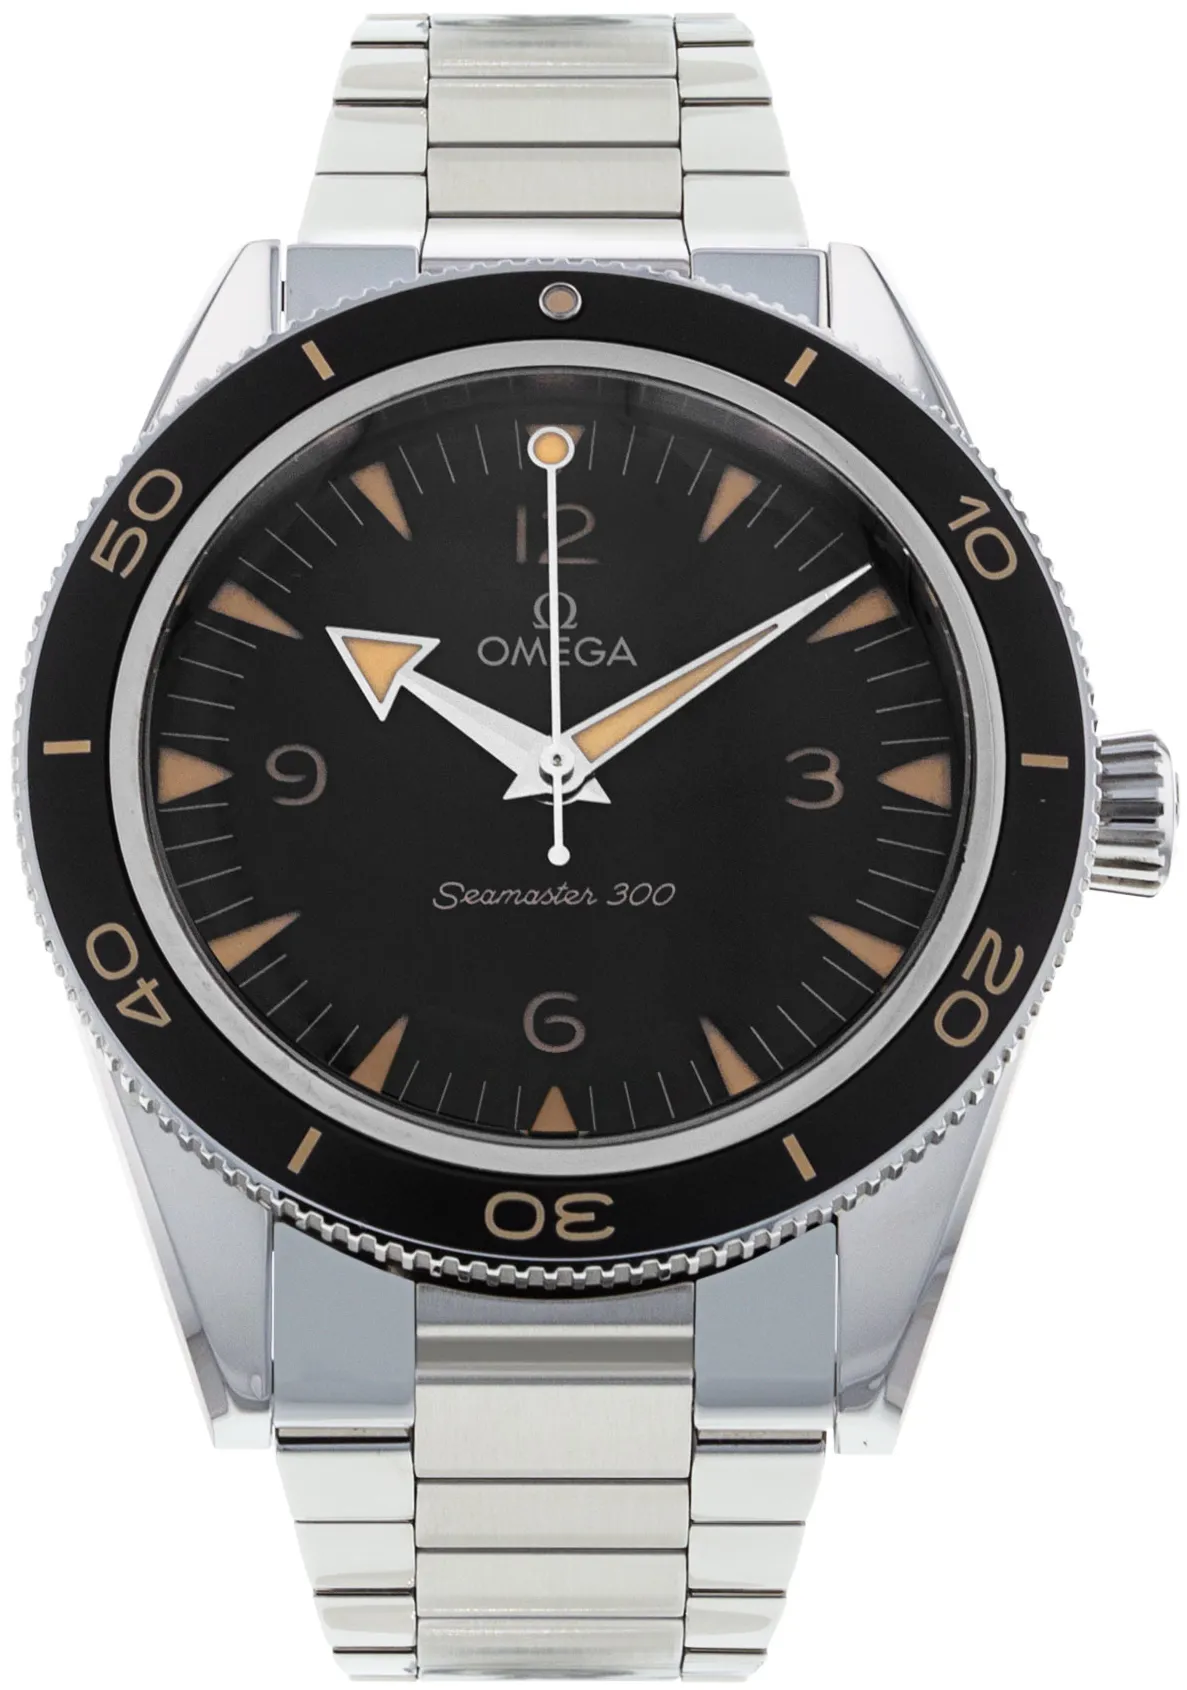 Omega Seamaster 300 234.30.41.21.01.001 41mm Stainless steel